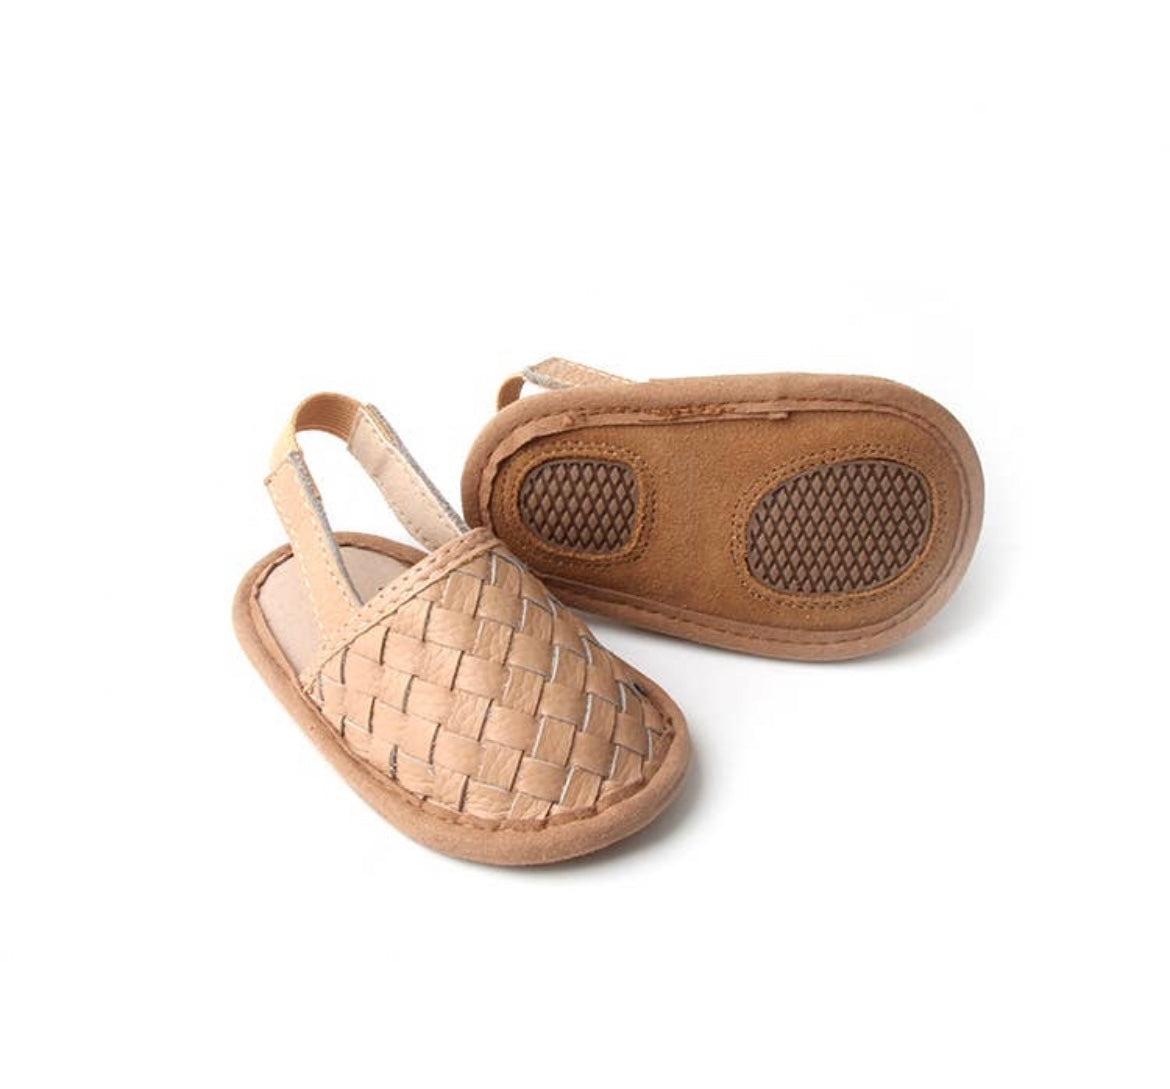 Woven Leather Baby Sandals in Latte